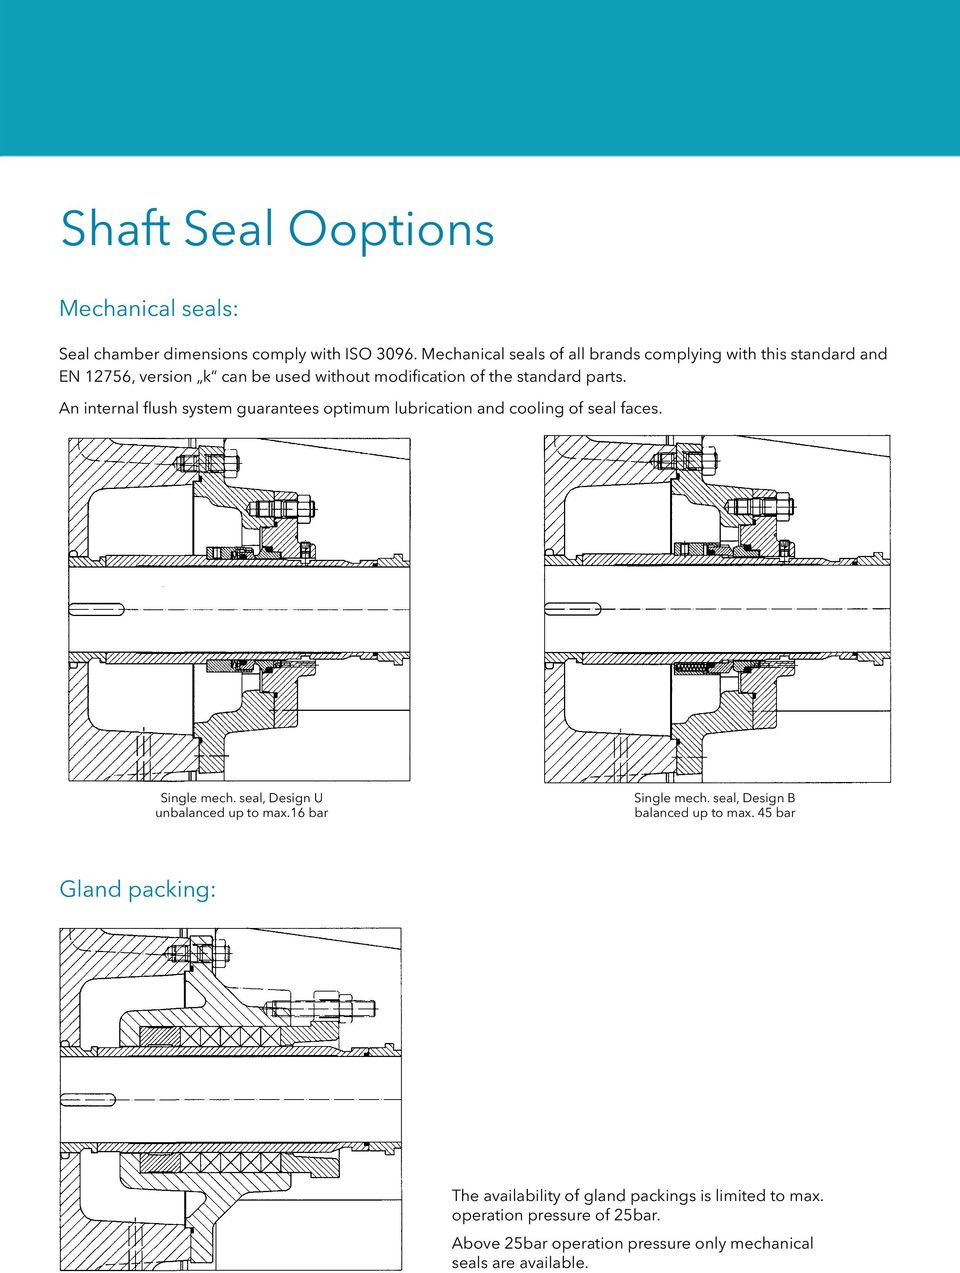 An internal flush system guarantees optimum lubrication and cooling of seal faces. Single mech. seal, Design U unbalanced up to max.